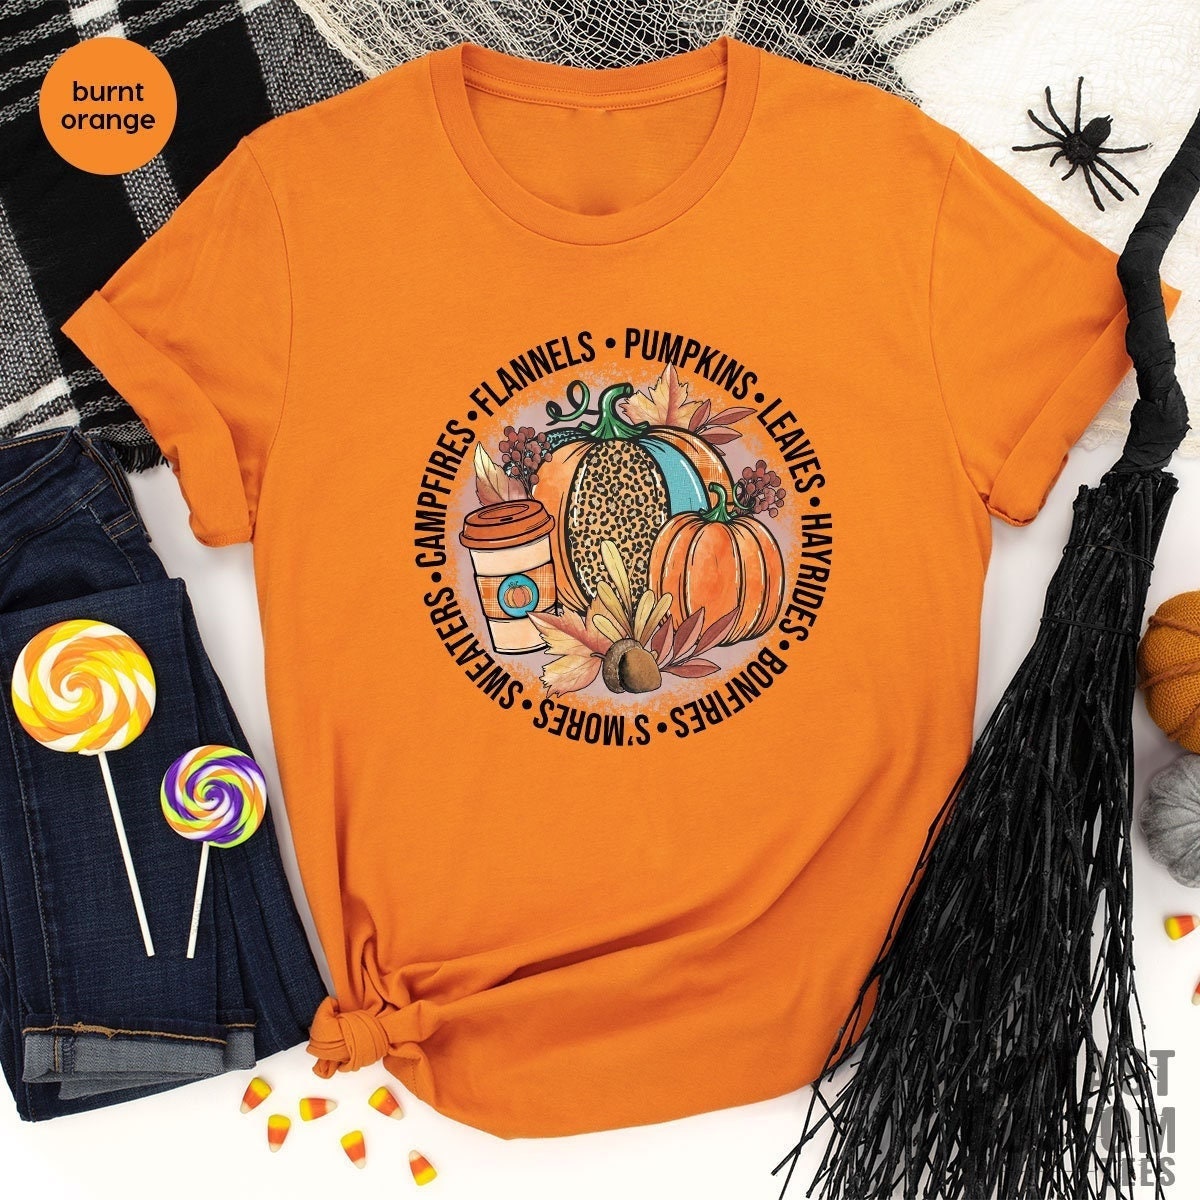 Hay Rides Bon Fires S’mores Sweaters Campfires Flannels Pumpkins Leaves Shirt, Fall T-shirt, Thanksgiving Autumn Shirt, Women Graphic Tee - Fastdeliverytees.com